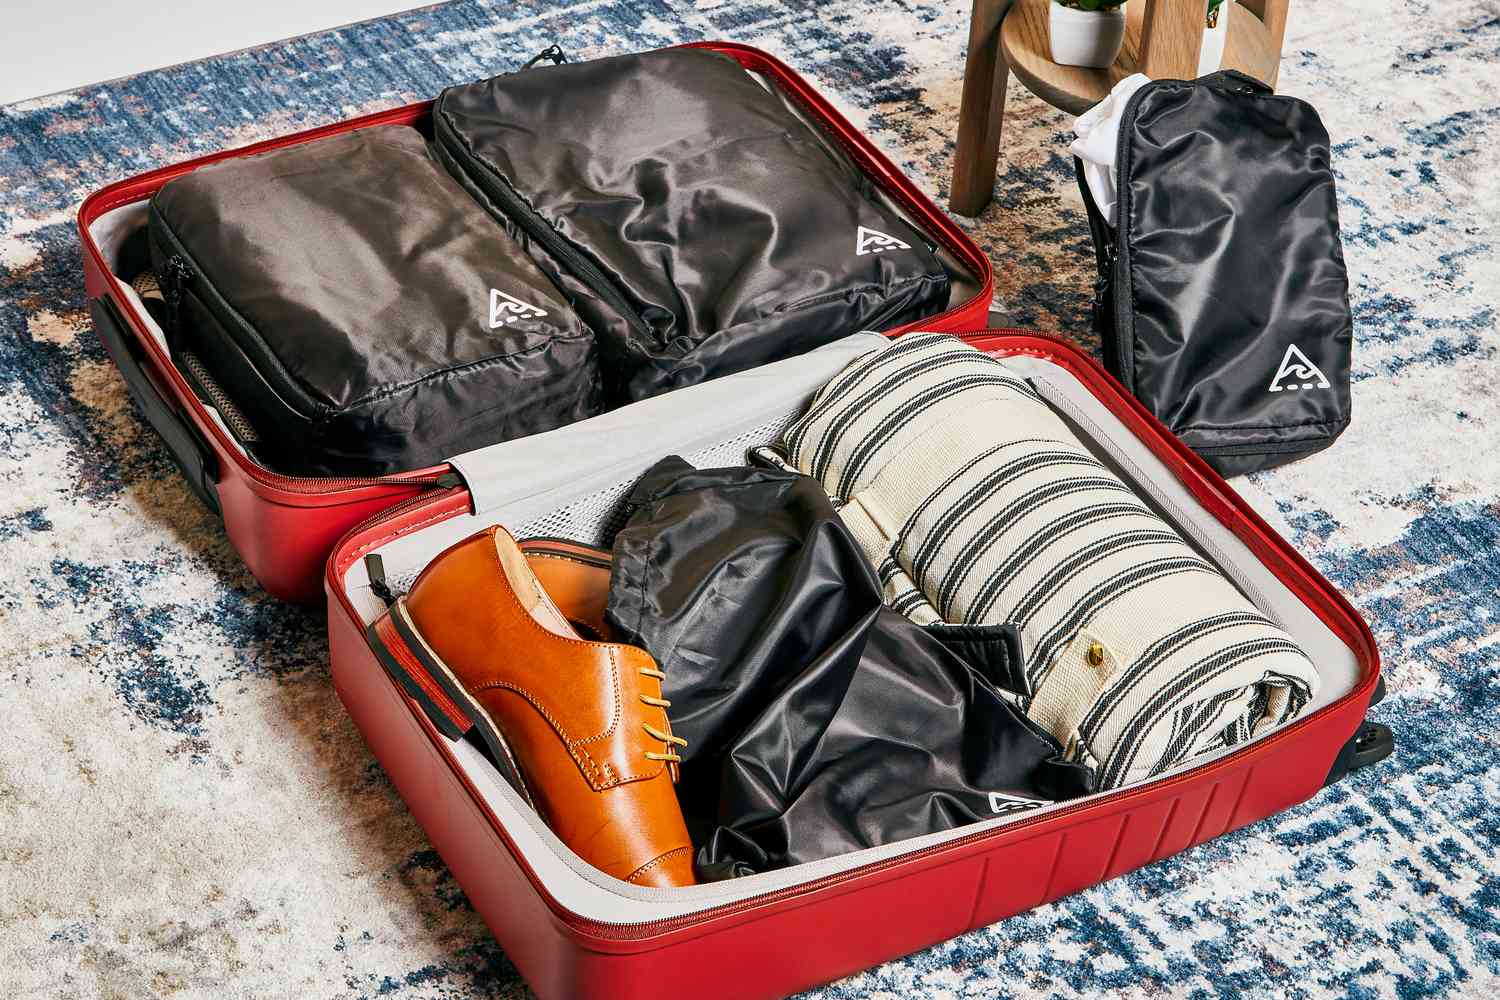 Well Traveled Compression Packing Cubes inside red suitcase sitting on blue and white carpet